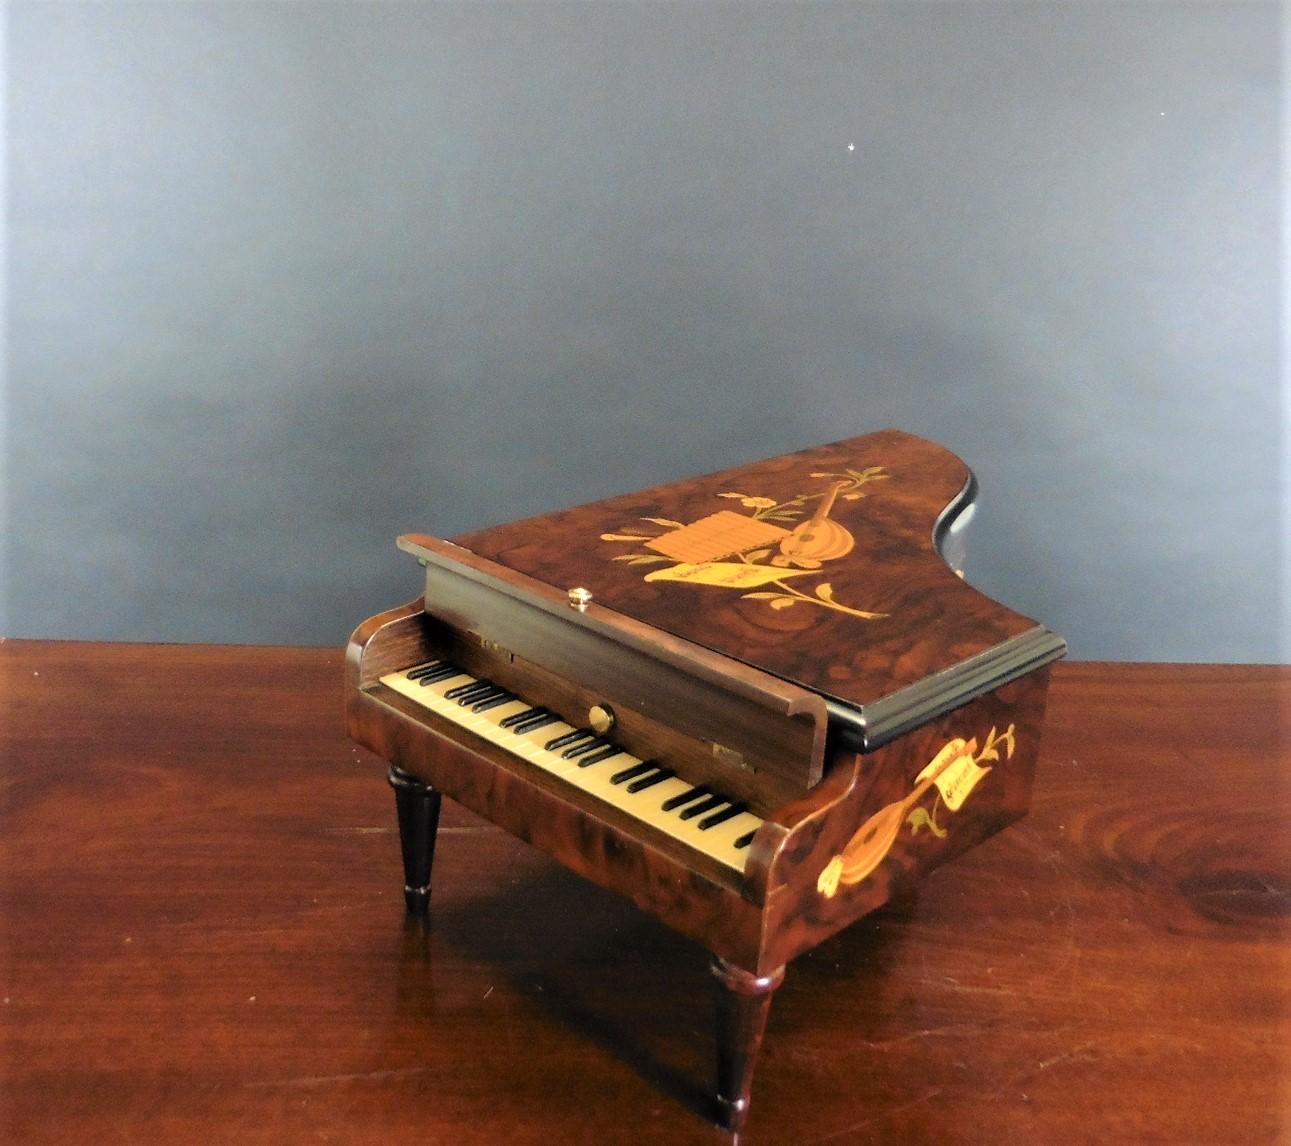 Music and jewelery box, Asprey London.
Movement by Reuge, Switzerland.

Miniature jewellery and music box in the style of a grand piano in a mahogany and walnut veneered case inlaid with marquetry throughout featuring musical instruments, raised